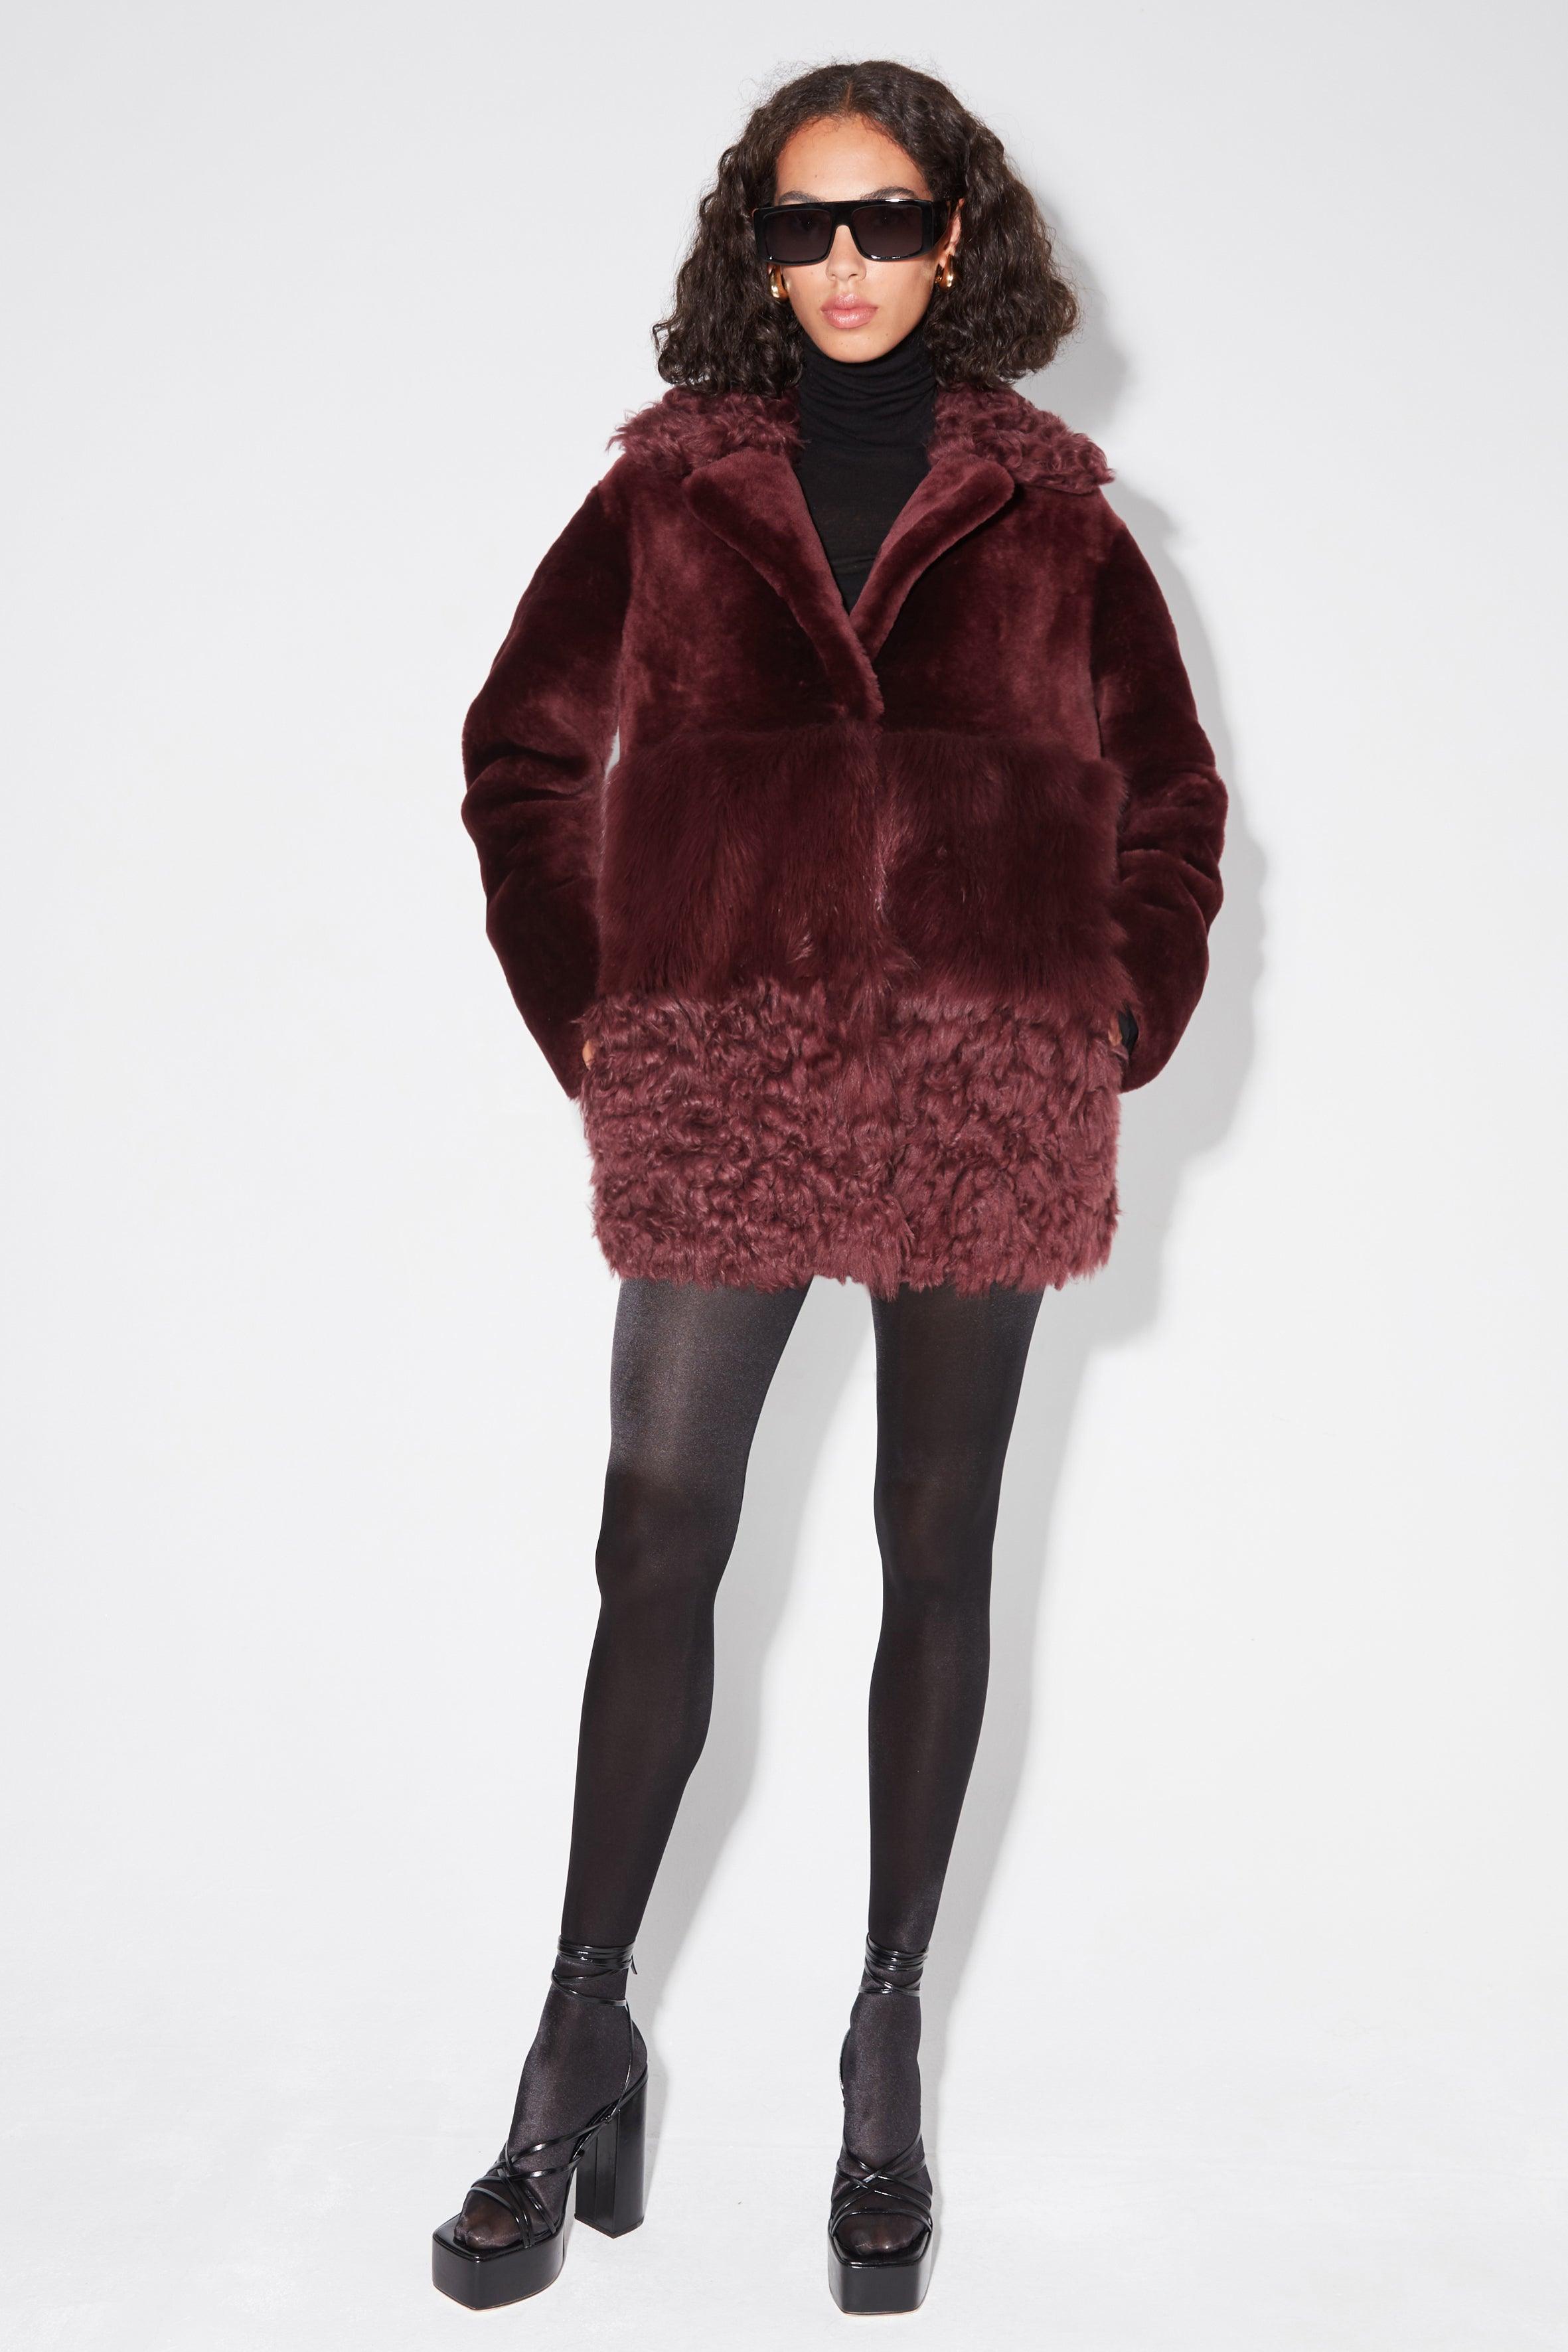 Model is wearing the Anouk Mulberry Luxurious Shearling Coat Front